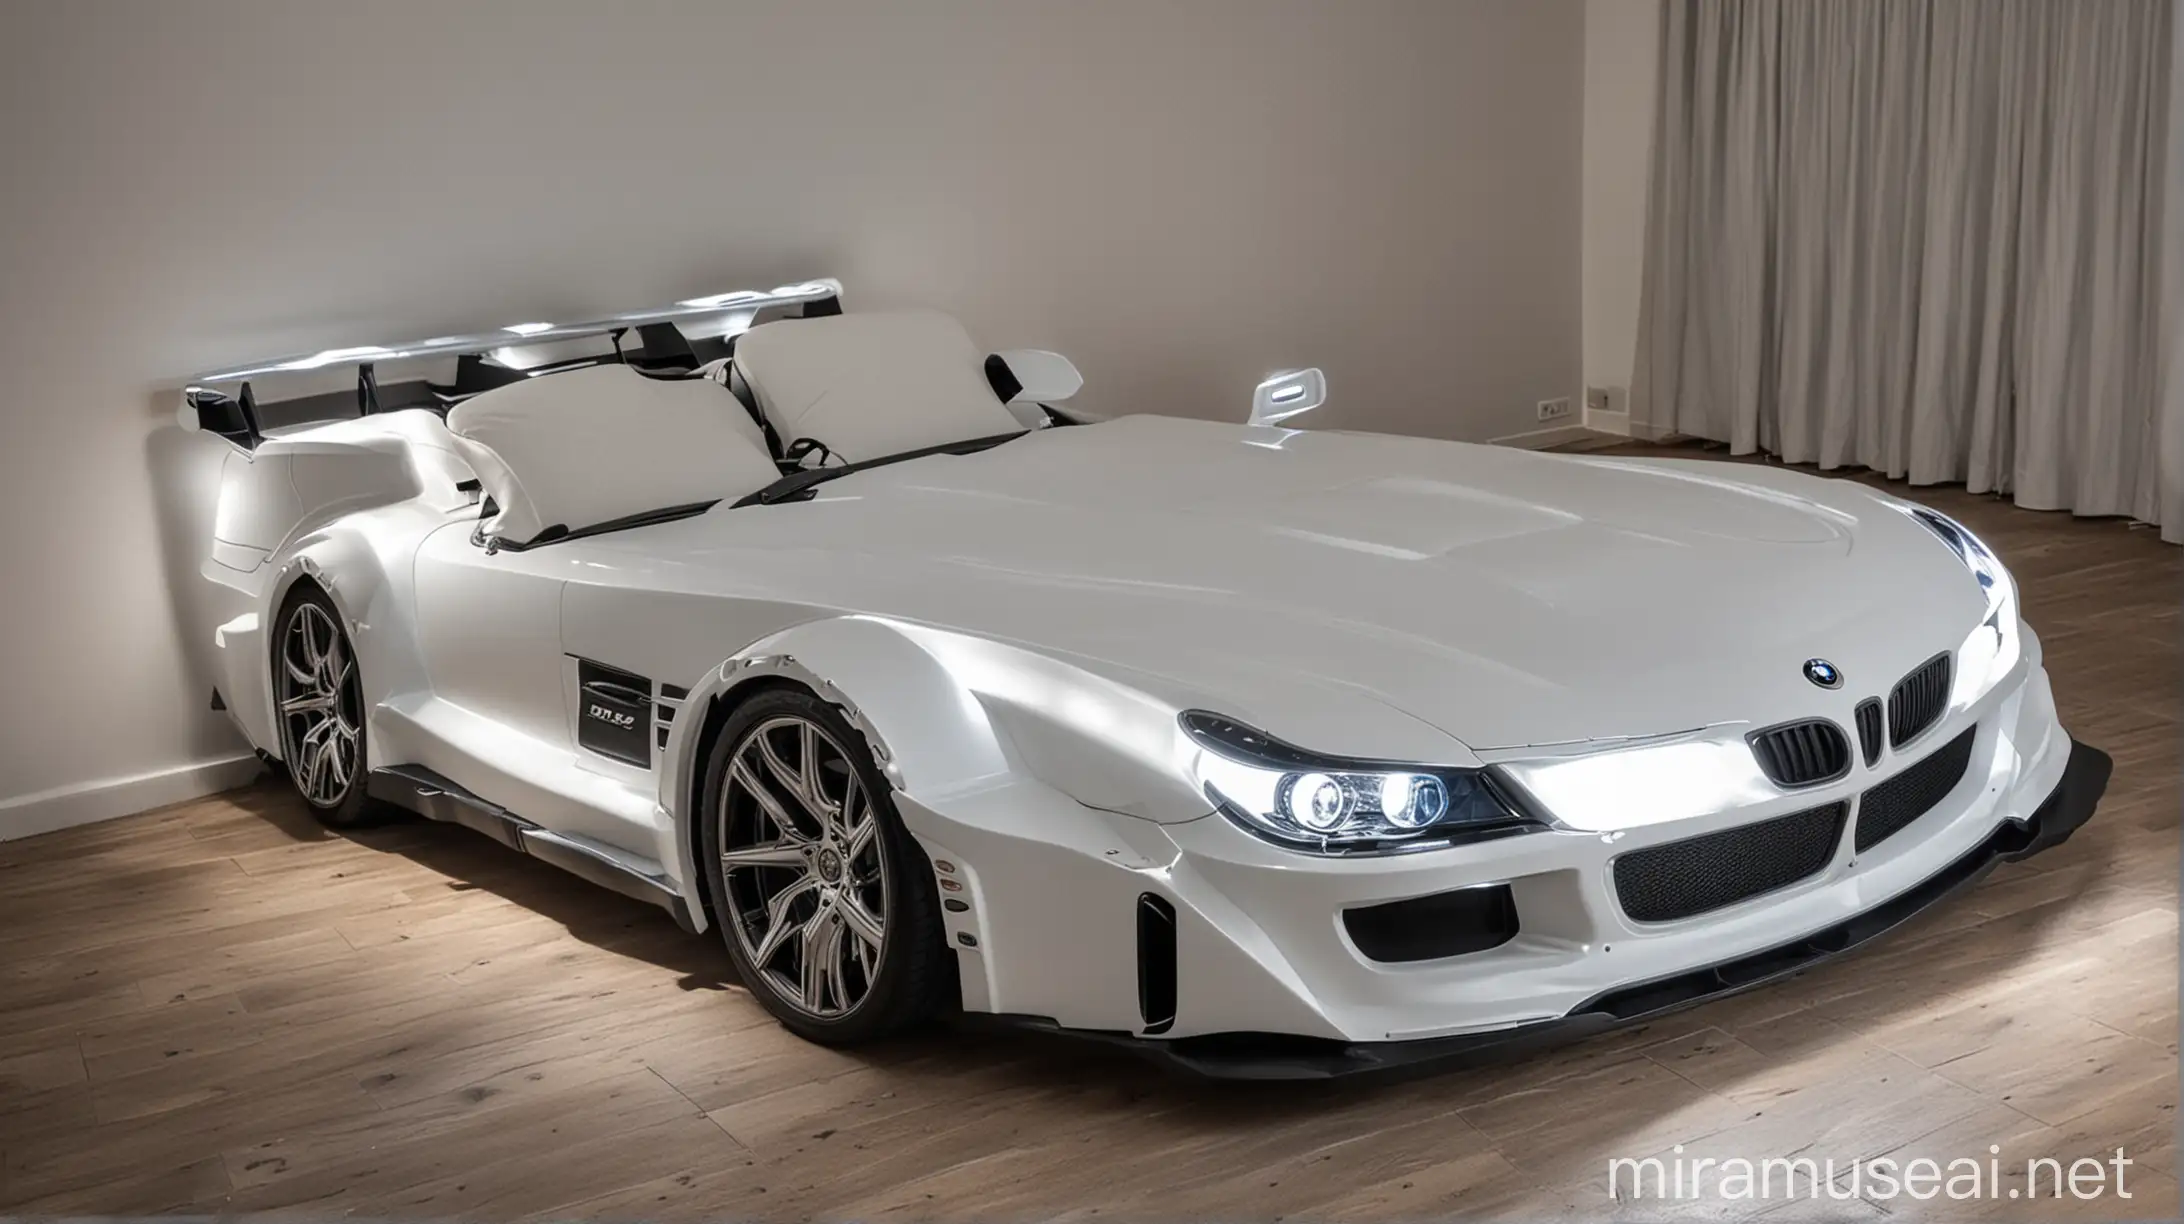 Double bed in the shape of a BMW amg car with headlights on